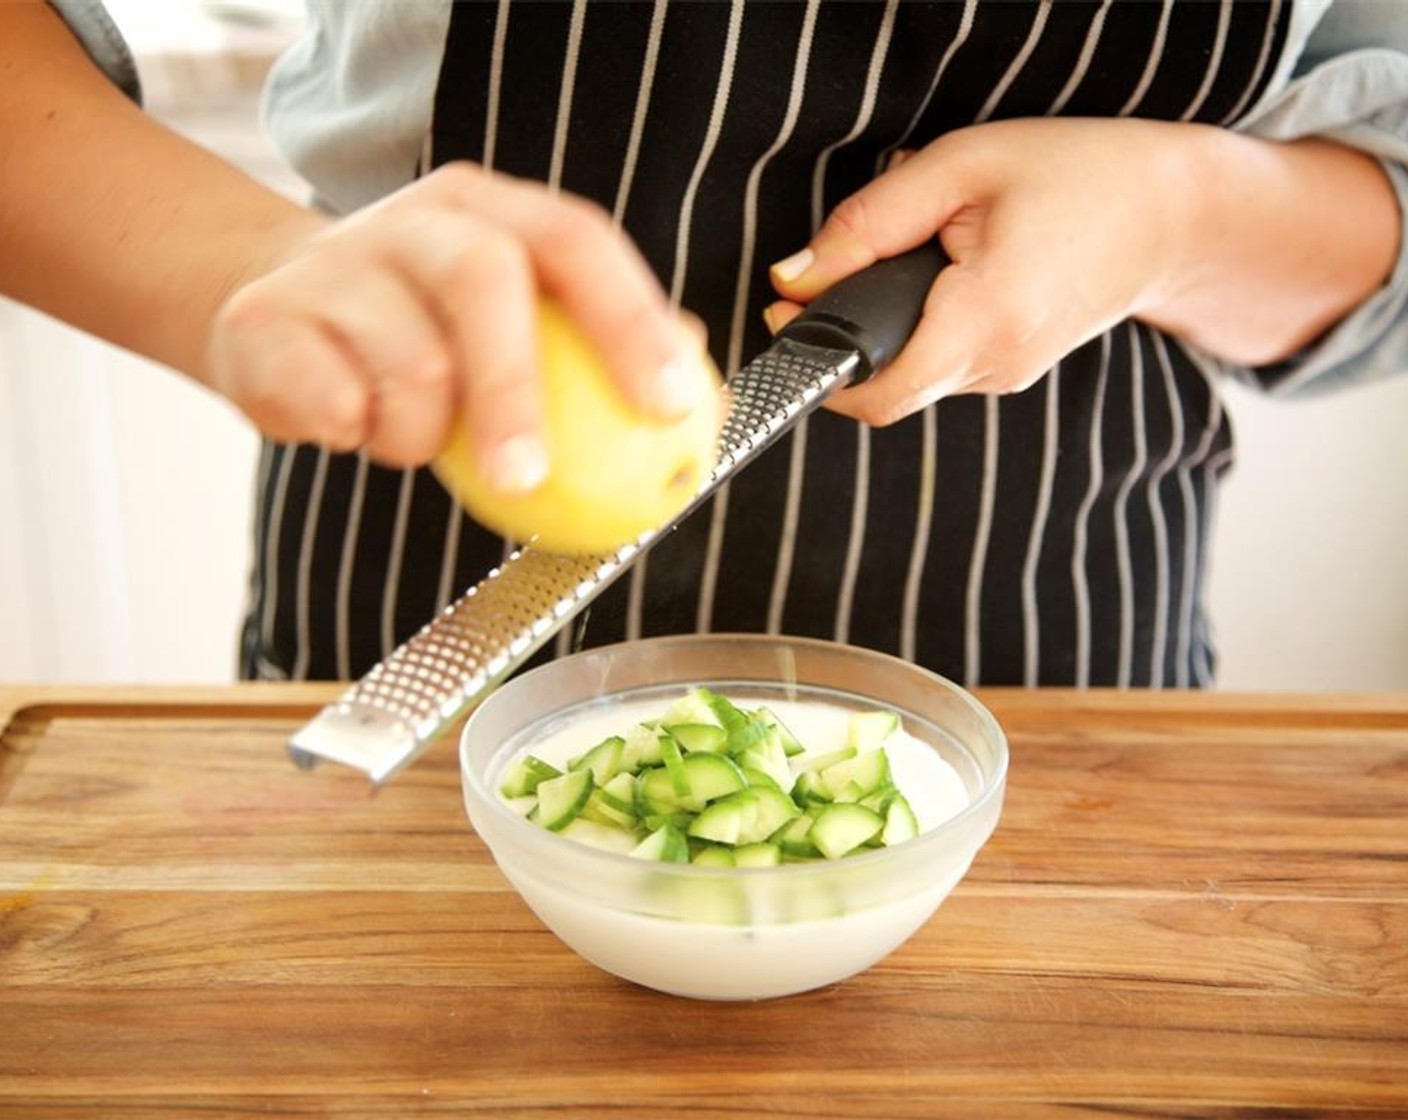 step 11 Rinse and pat dry small bowl used for onion and chili. In the small bowl, combine half a cup of the Greek Yogurt (1/2 cup), the cucumber, and salt. Zest the Lemon (1) directly into the bowl. Stir well and reserve for plating.